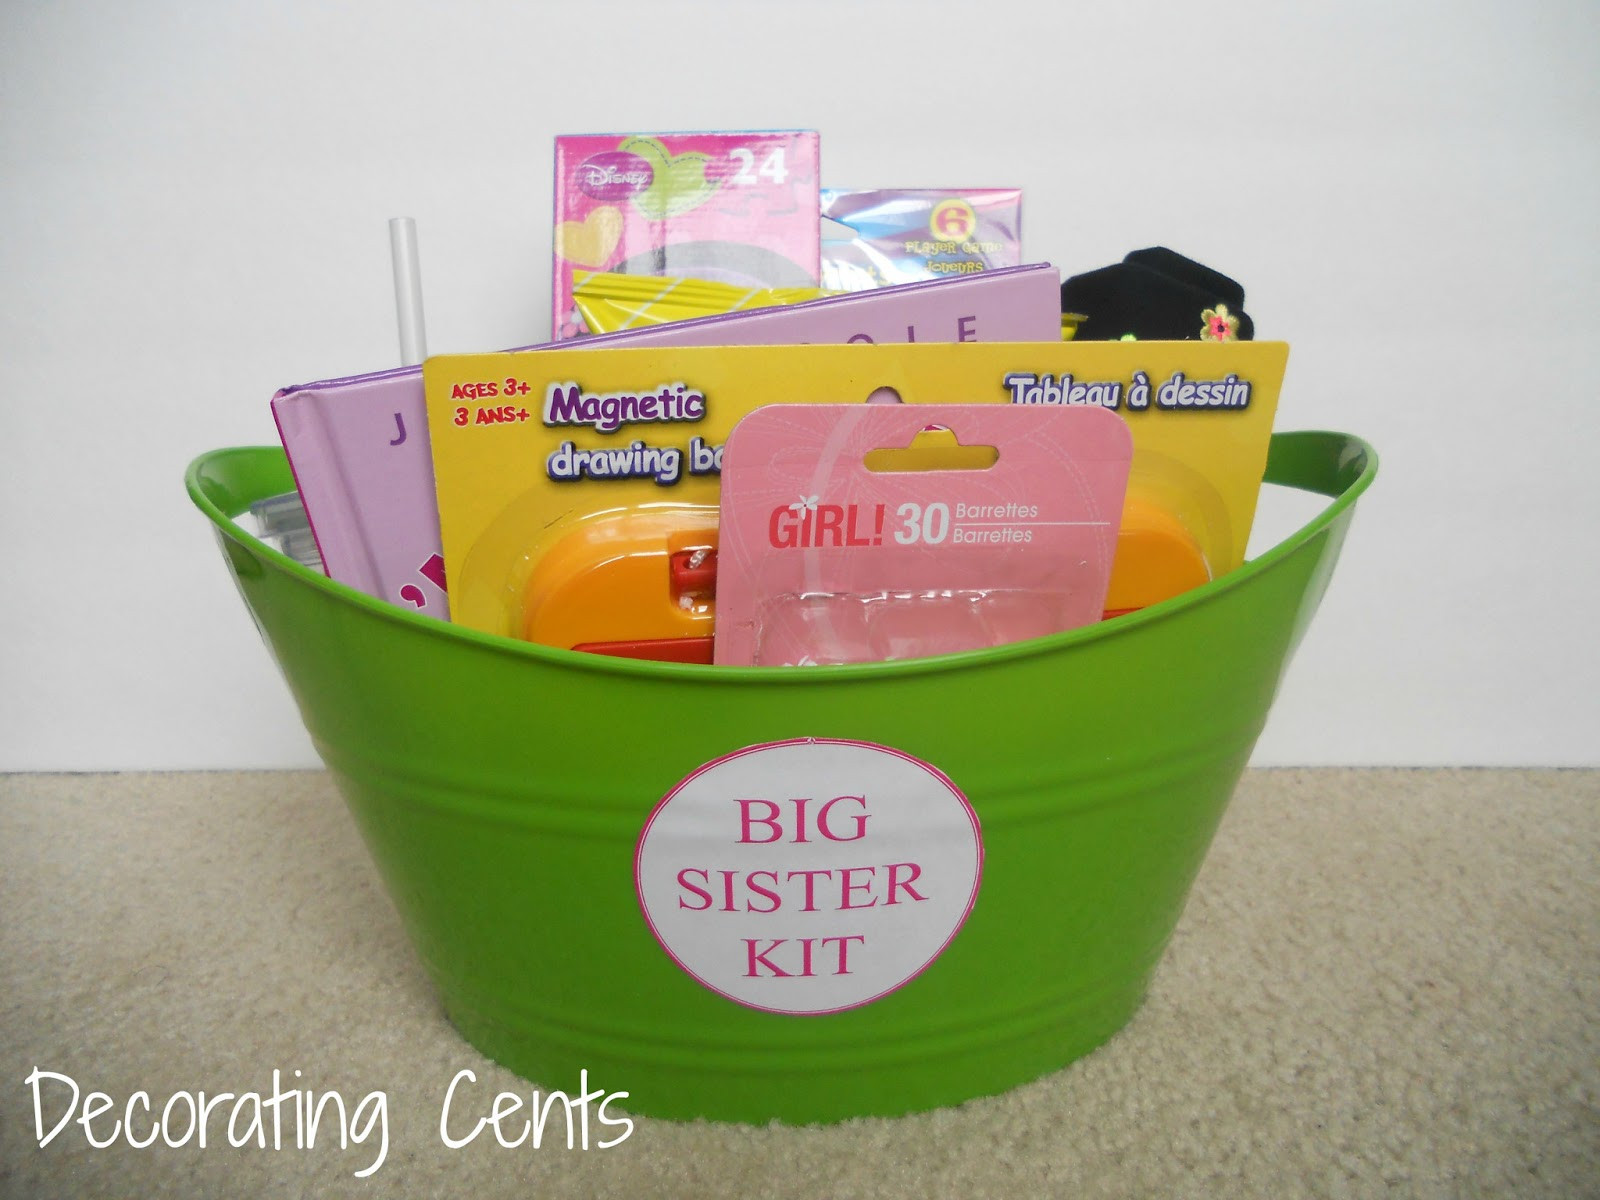 Gift Ideas From Baby To Big Sister
 Big Sister Kit